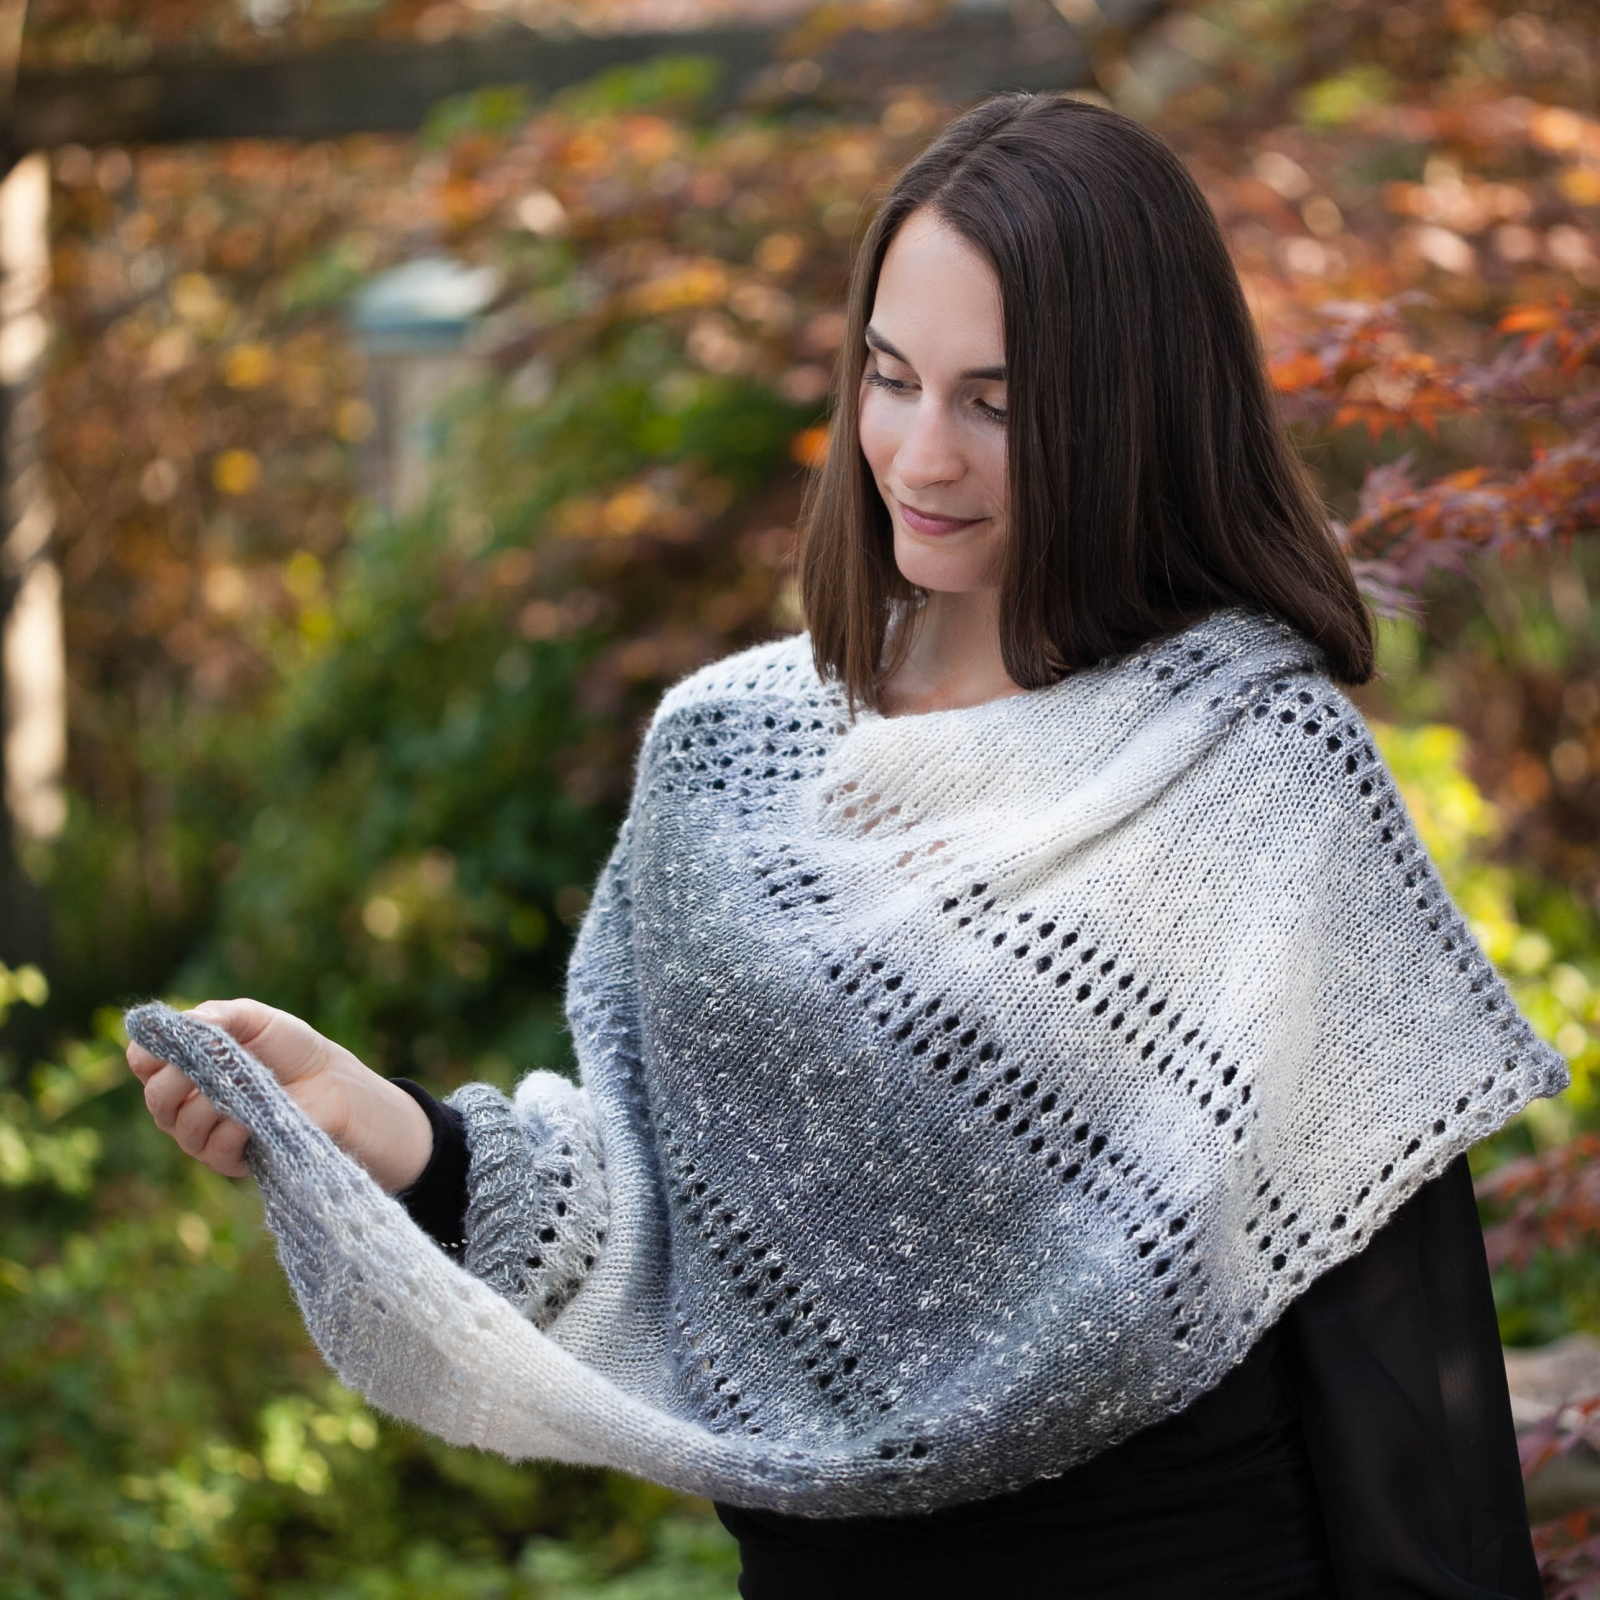 Poncho Pattern Knit Loom Knit Poncho Cape Pattern The Grey Skies Poncho Has An Elegant Design And Is An Easy Loom Knit Pdf Pattern Download